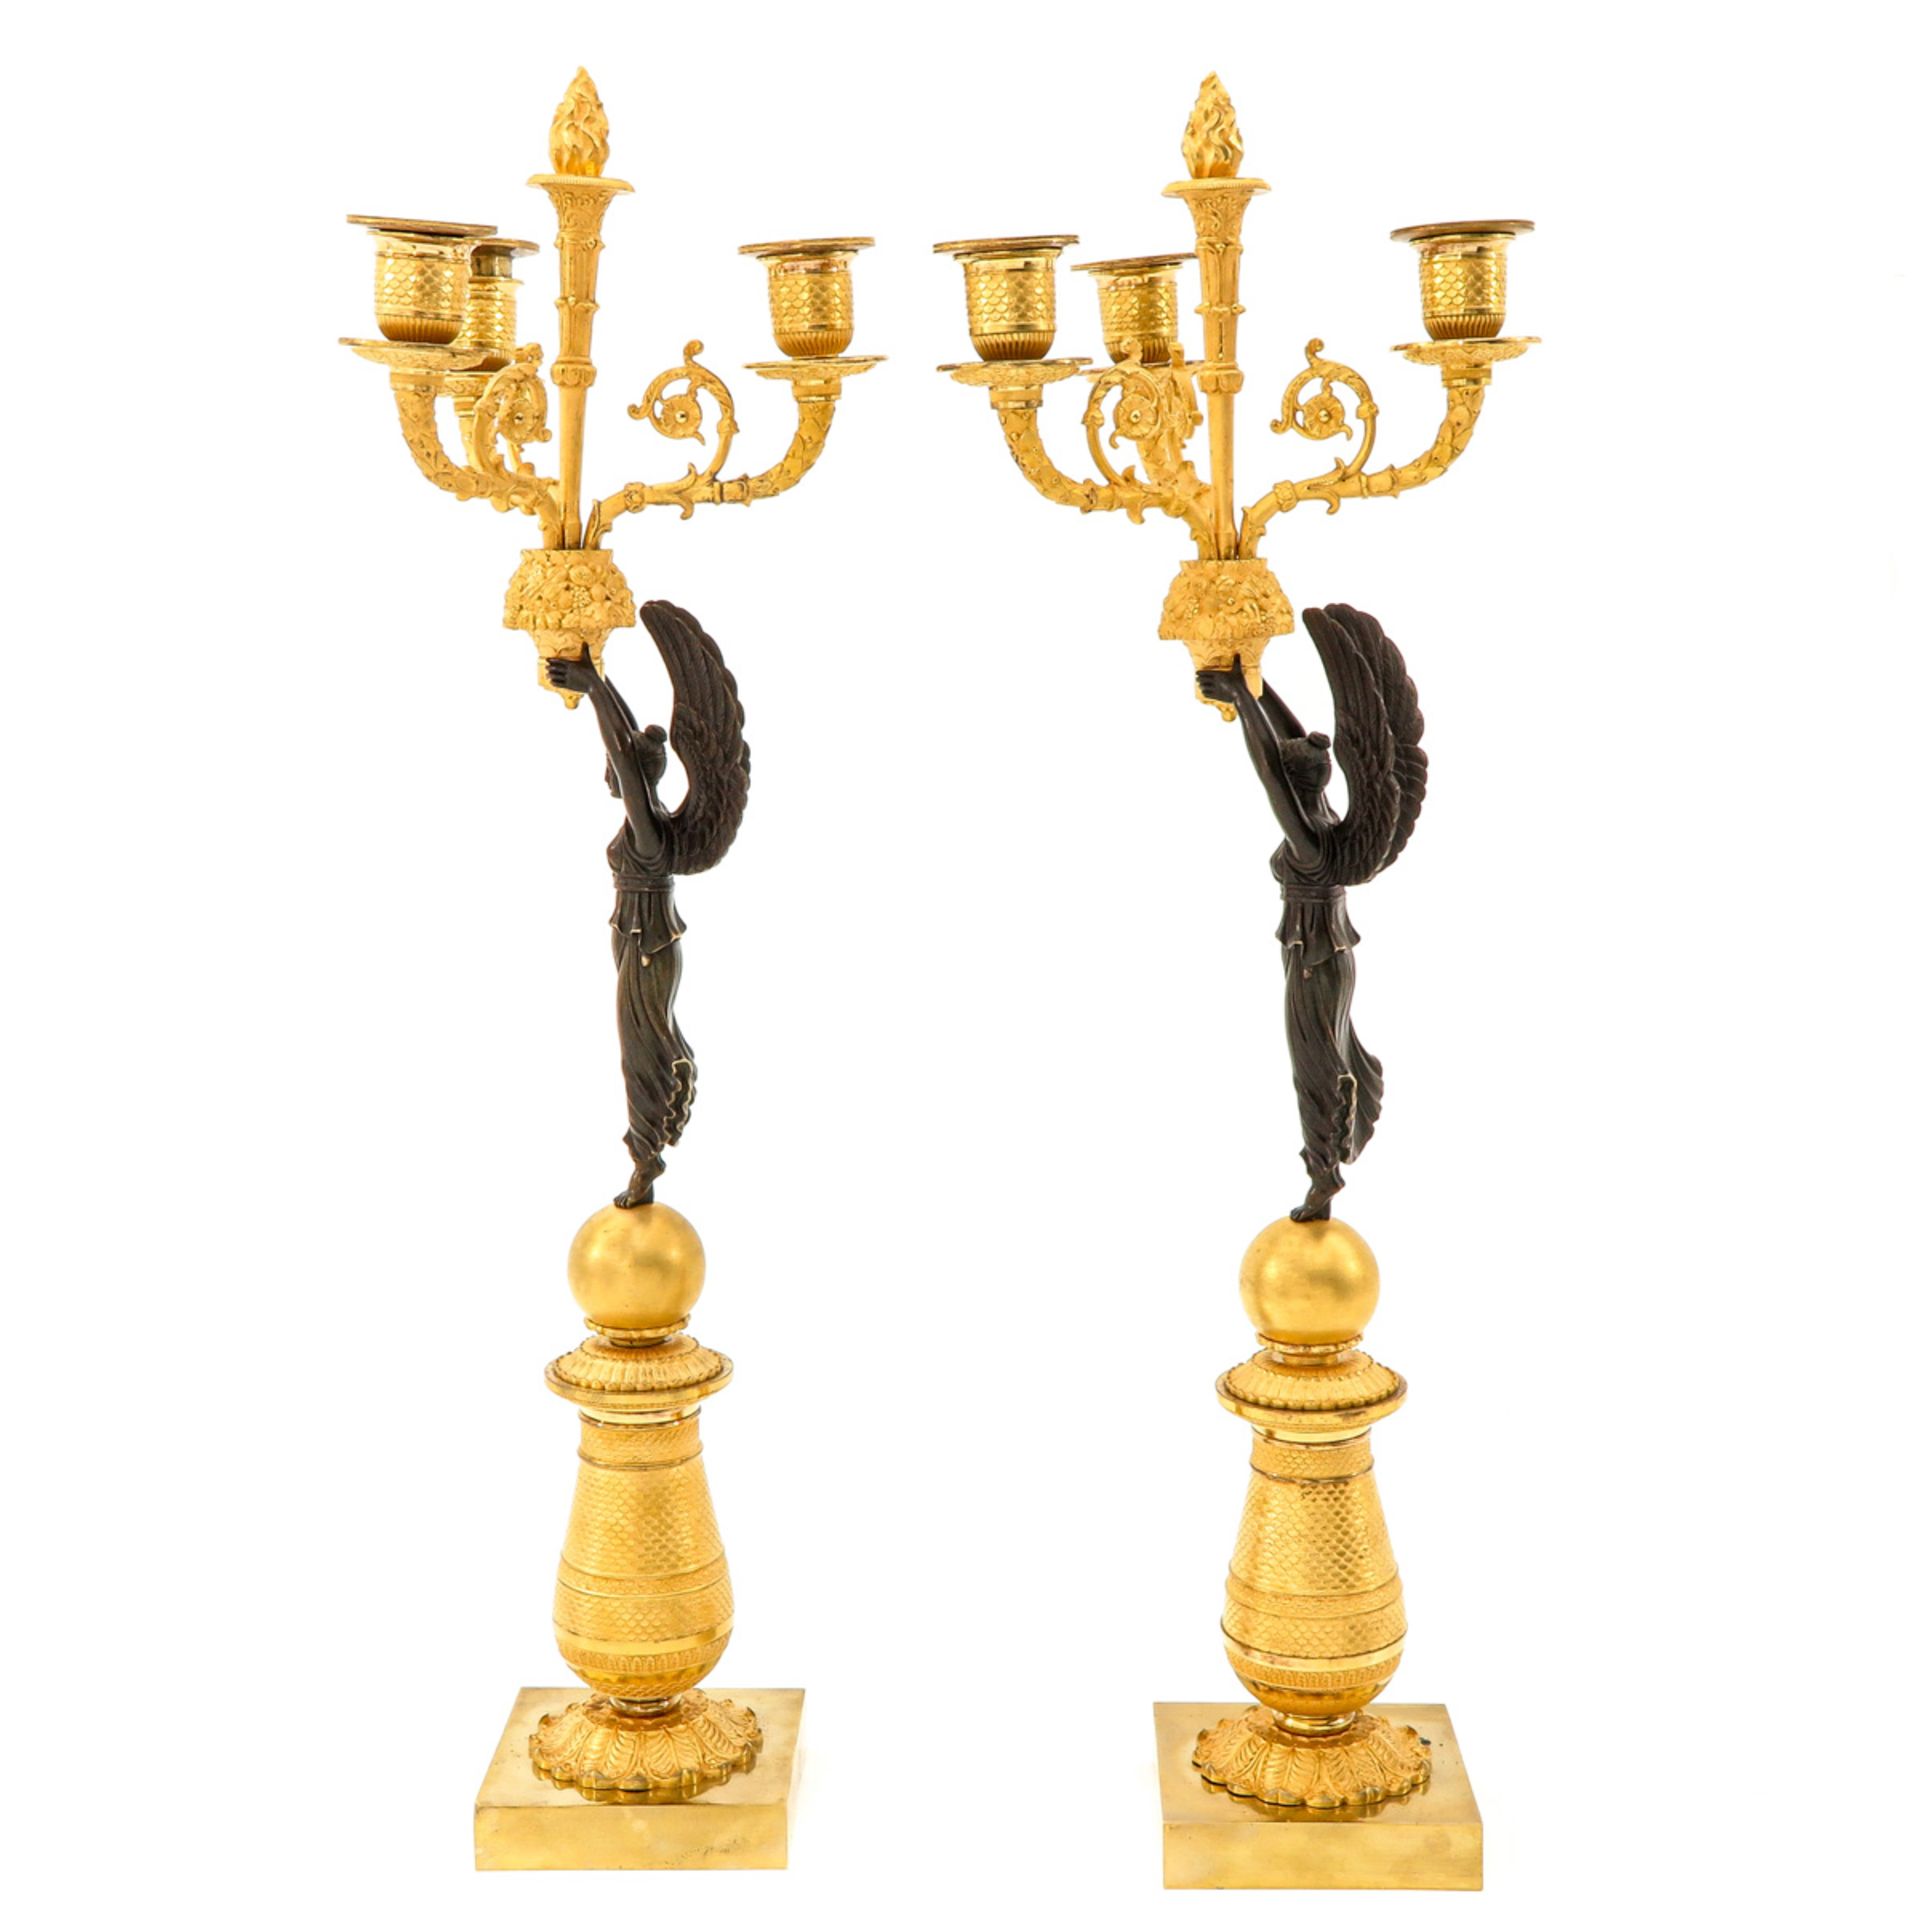 A Pair of Empire Period Candlesticks - Image 2 of 10